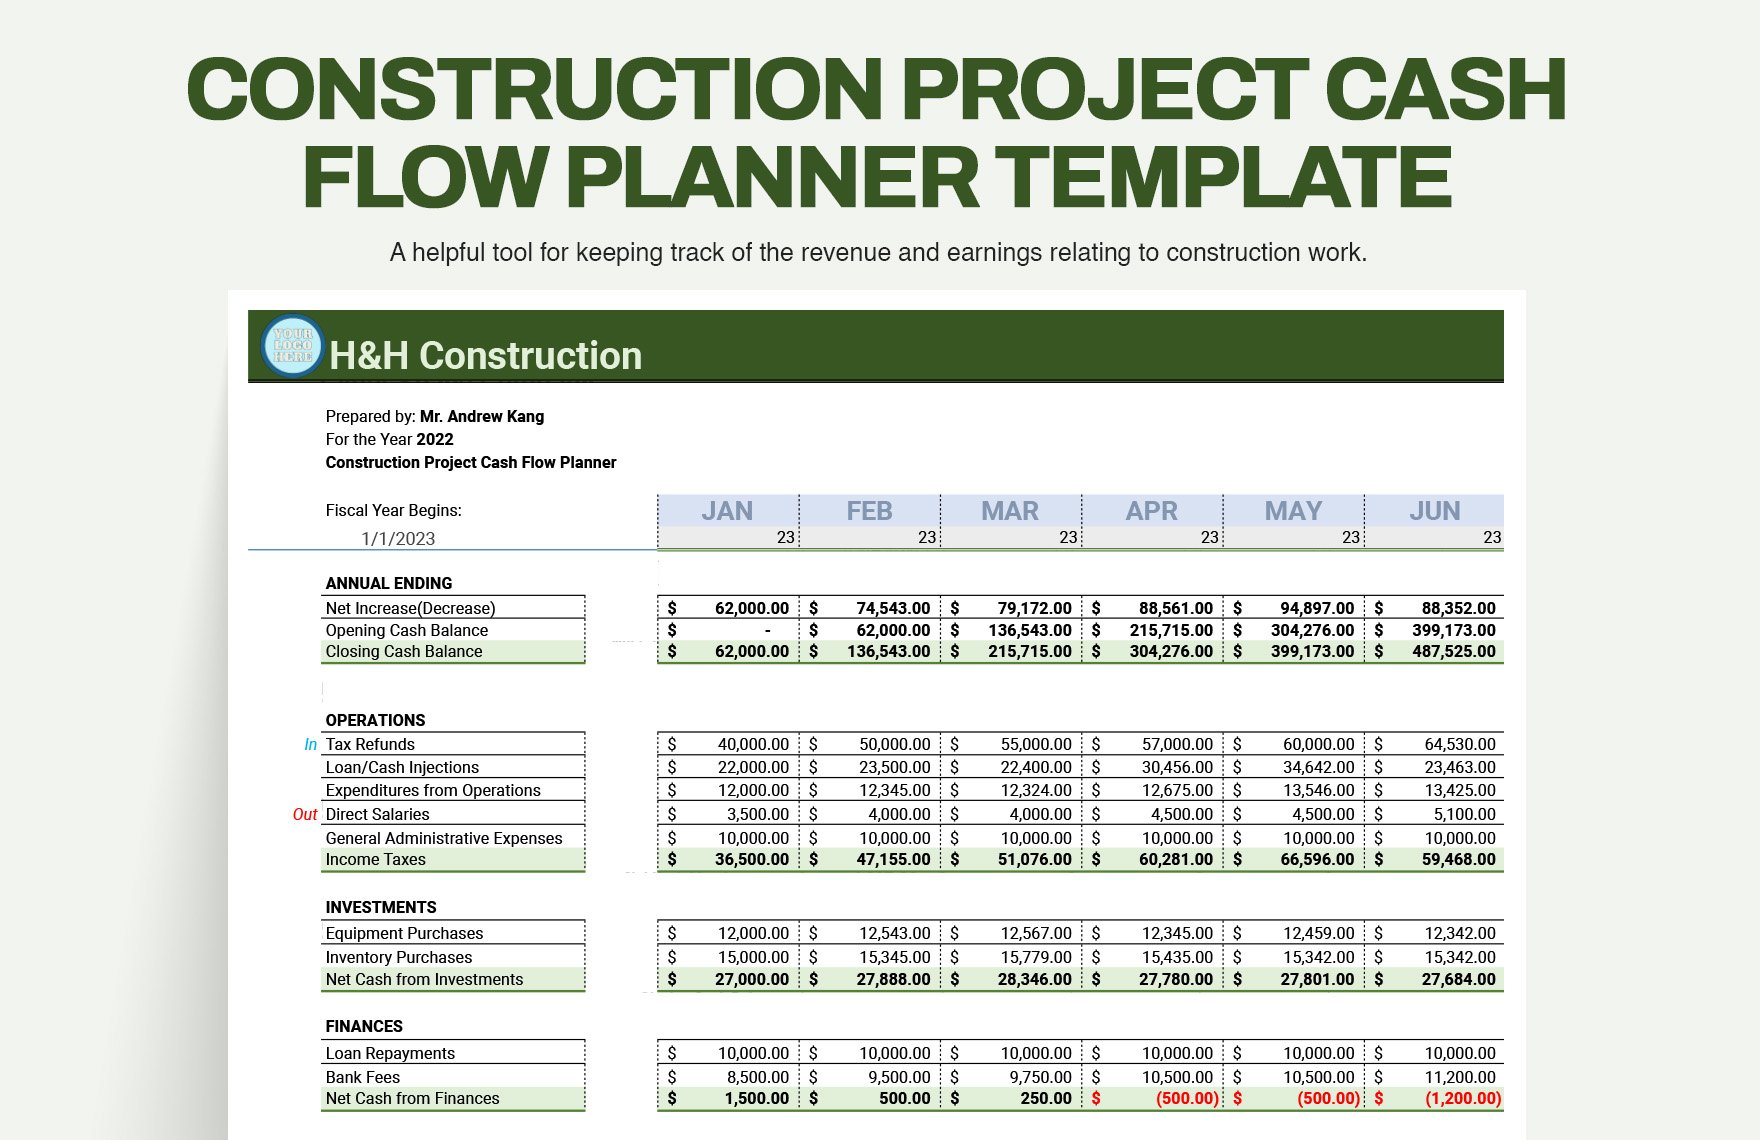 Construction Project Cash Flow Planner Template in Excel, Google Sheets